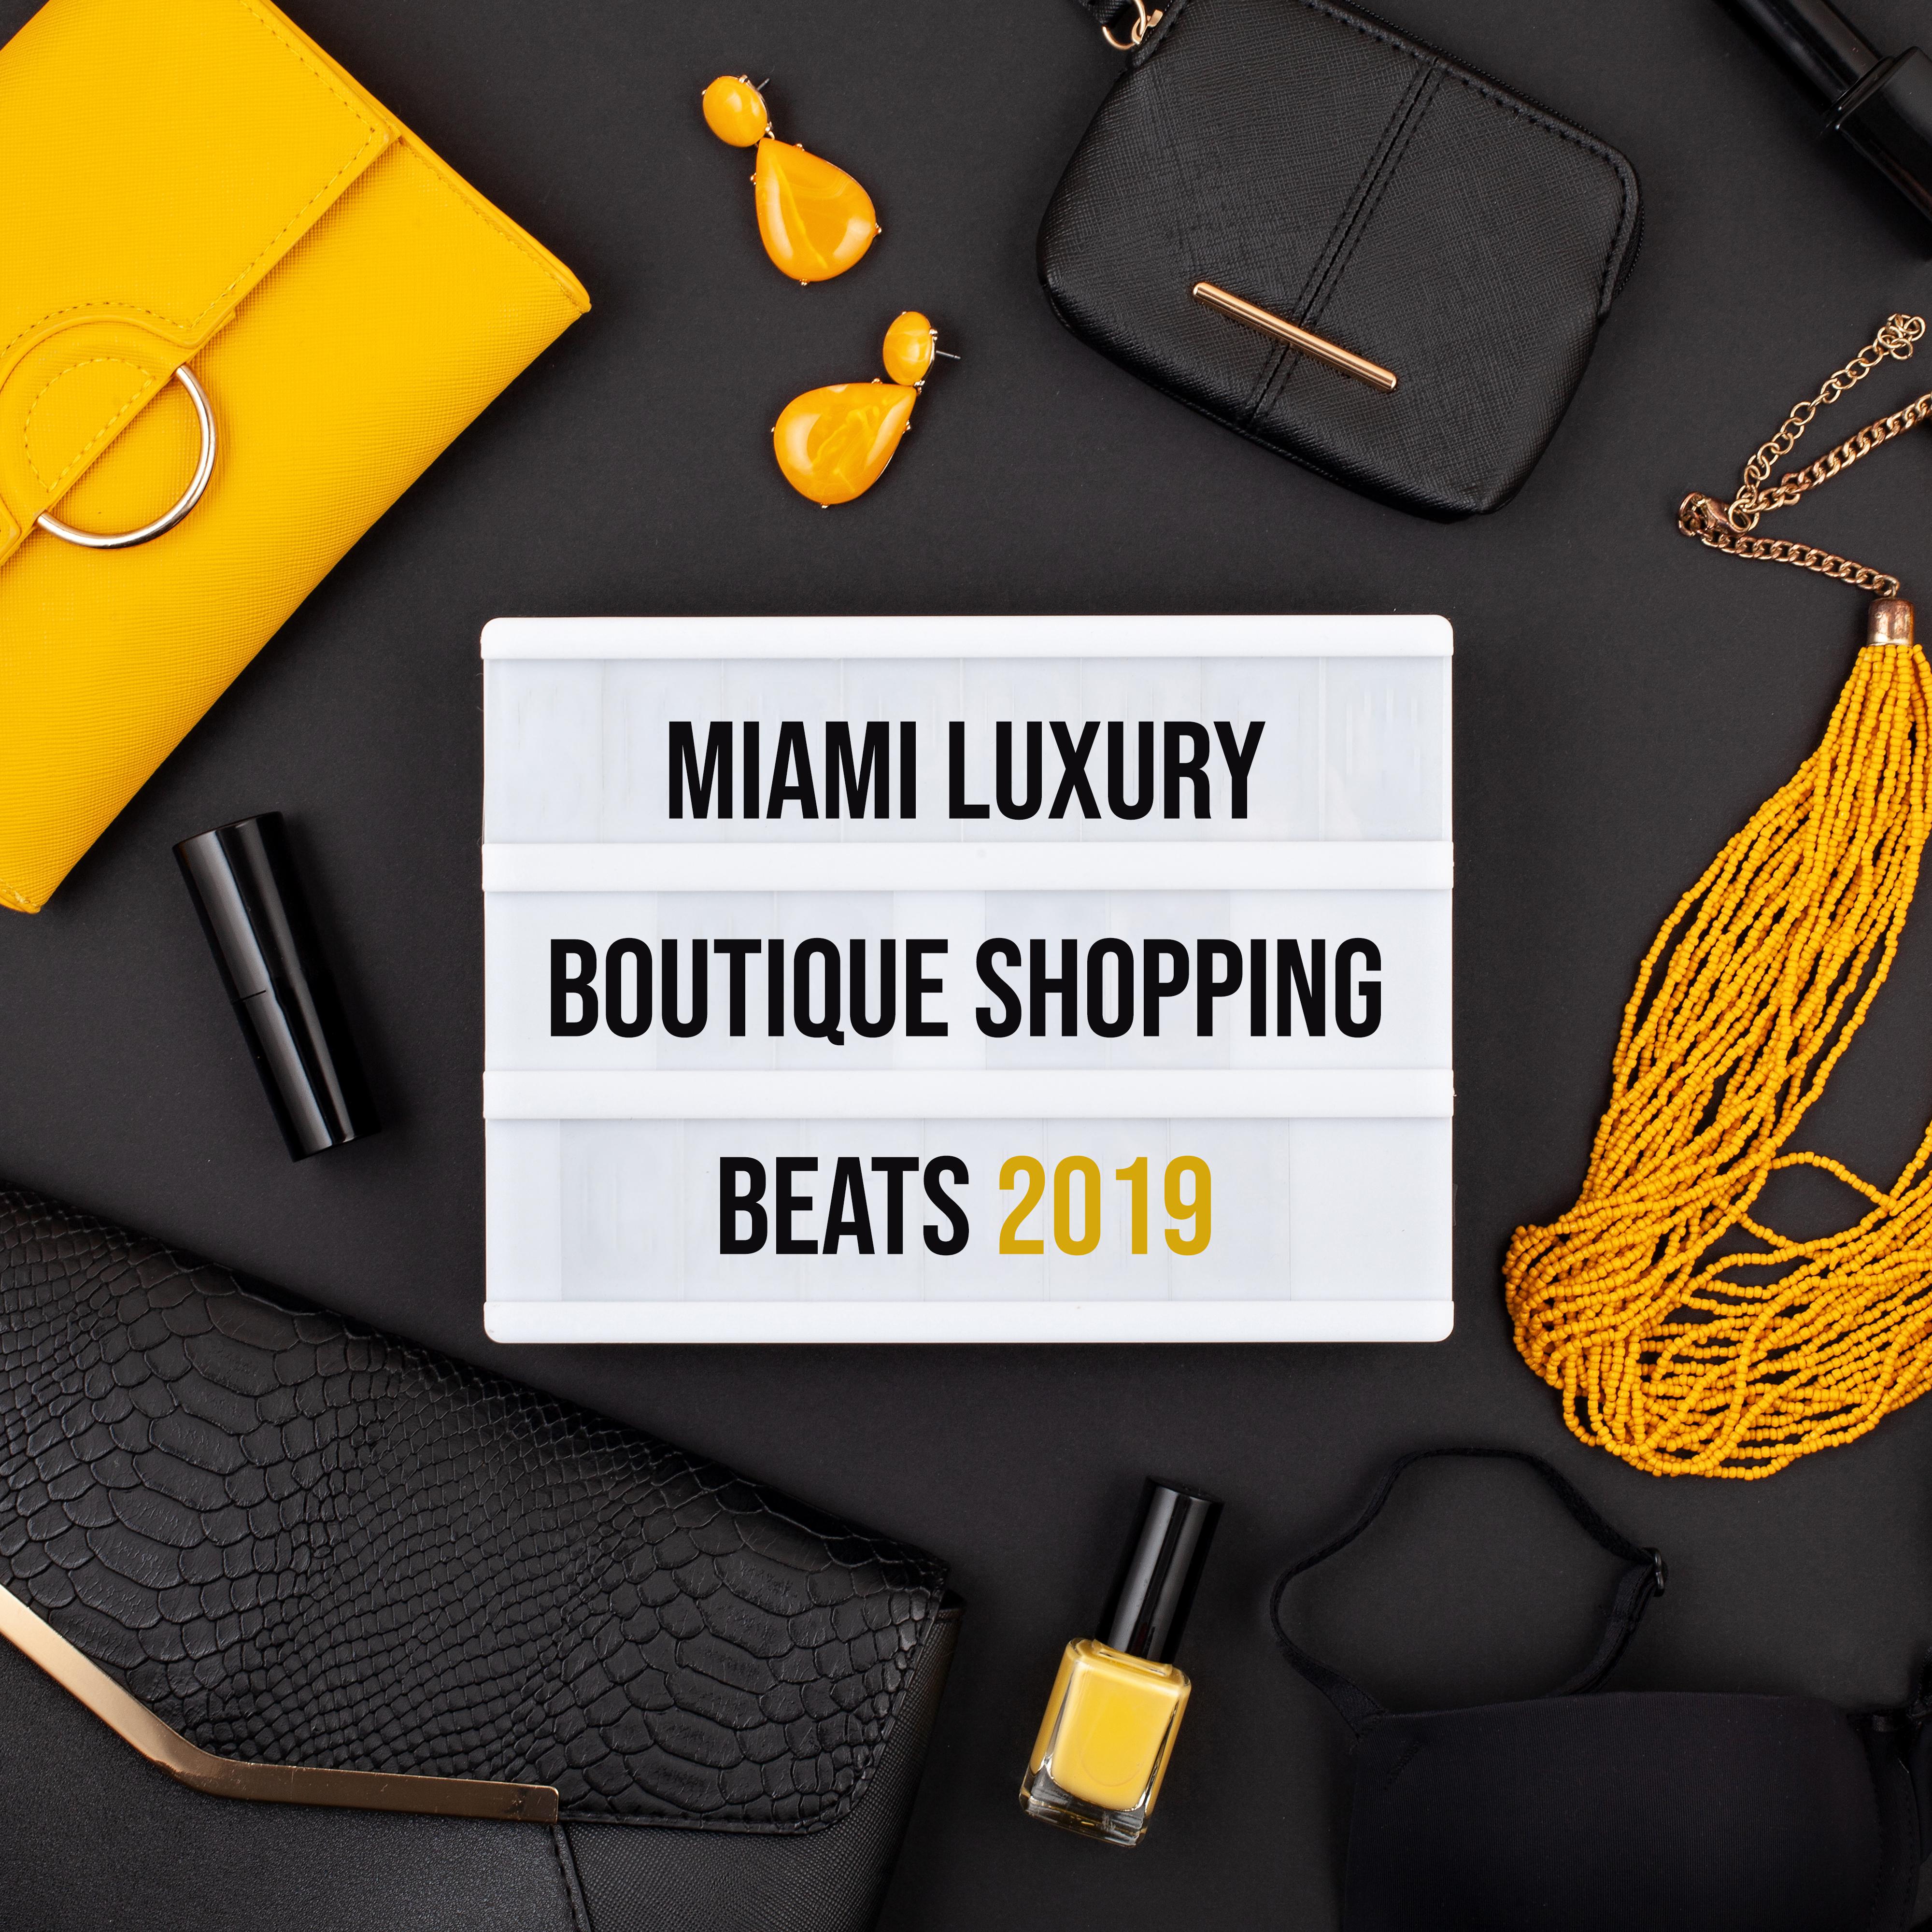 Miami Luxury Boutique Shopping Beats 2019 – Compilation of Sunny Chillout Music for Shops with Clothes & Elegant Boutiques, Beats for Pleasant Shopping